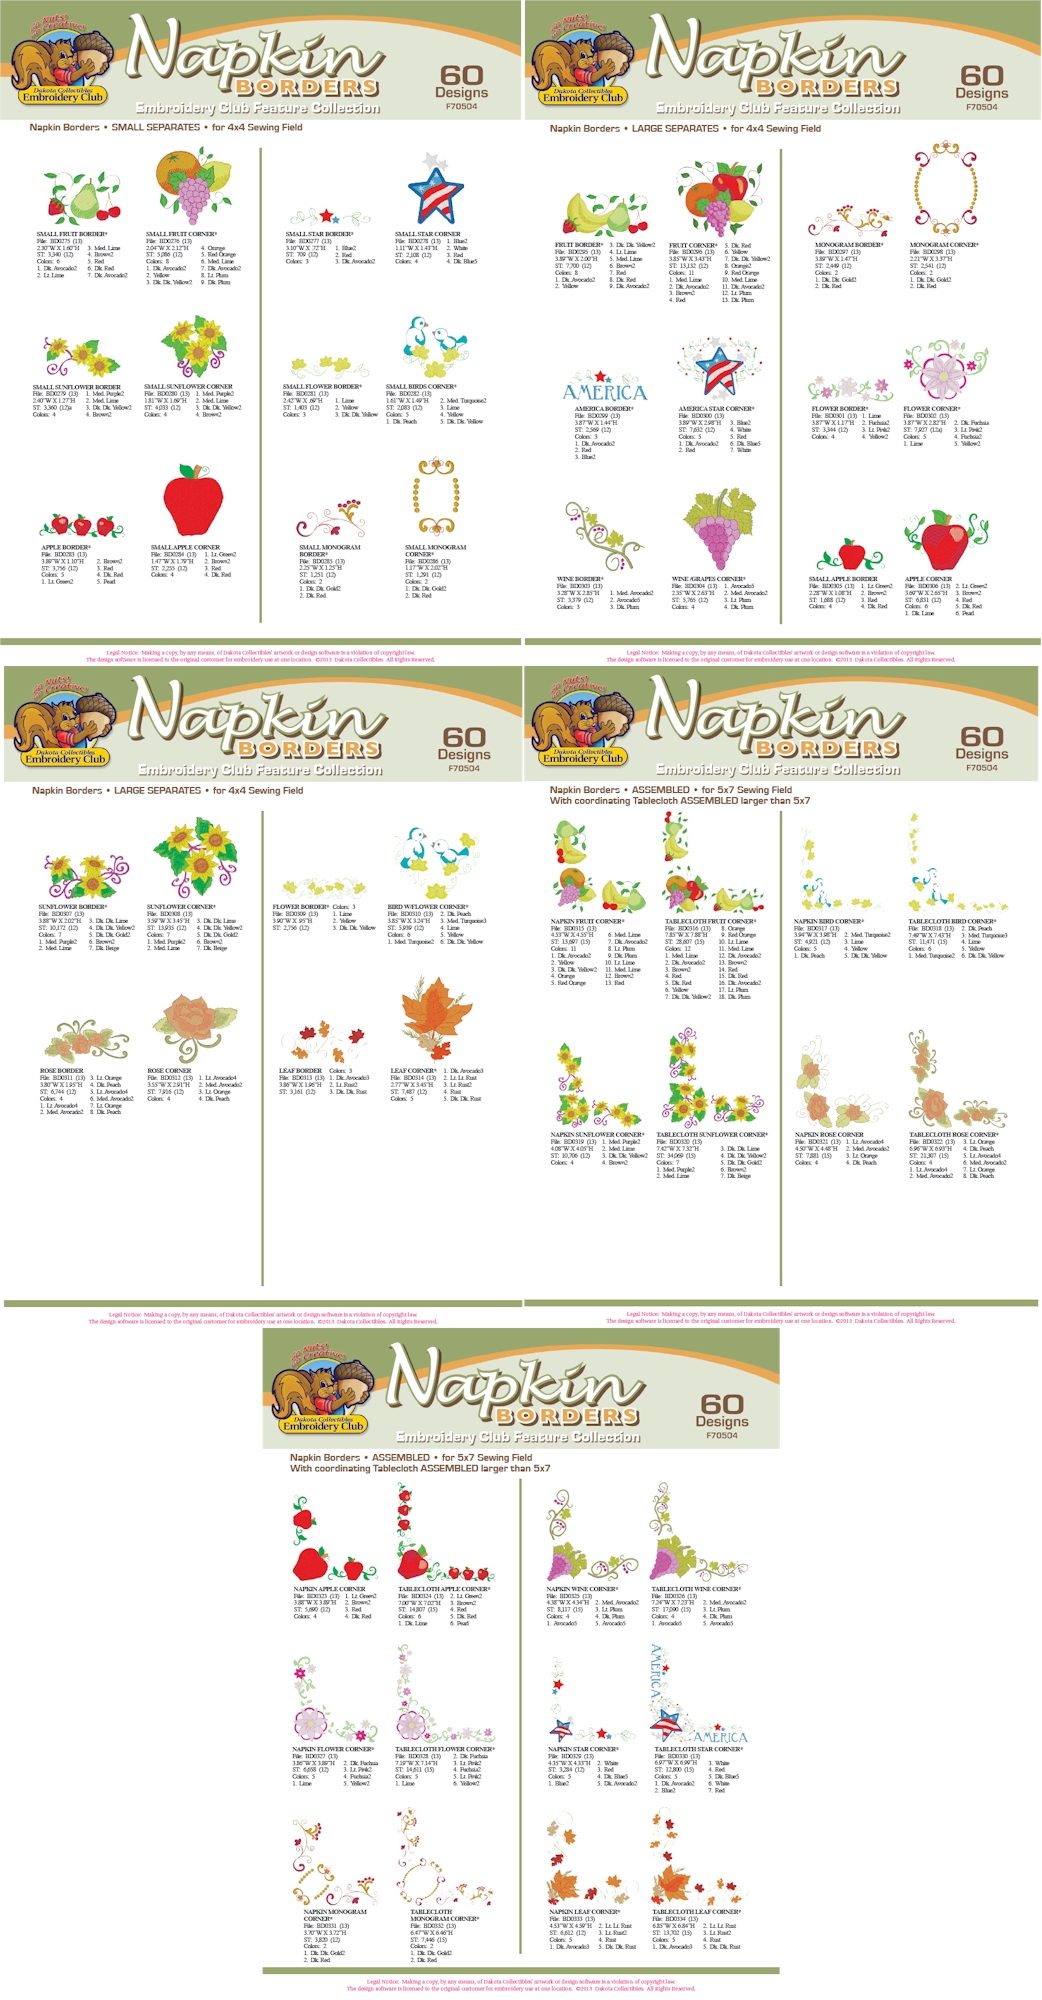 Napkin Borders Embroidery Designs by Dakota Collectibles on Multi-Format CD-ROM F70504